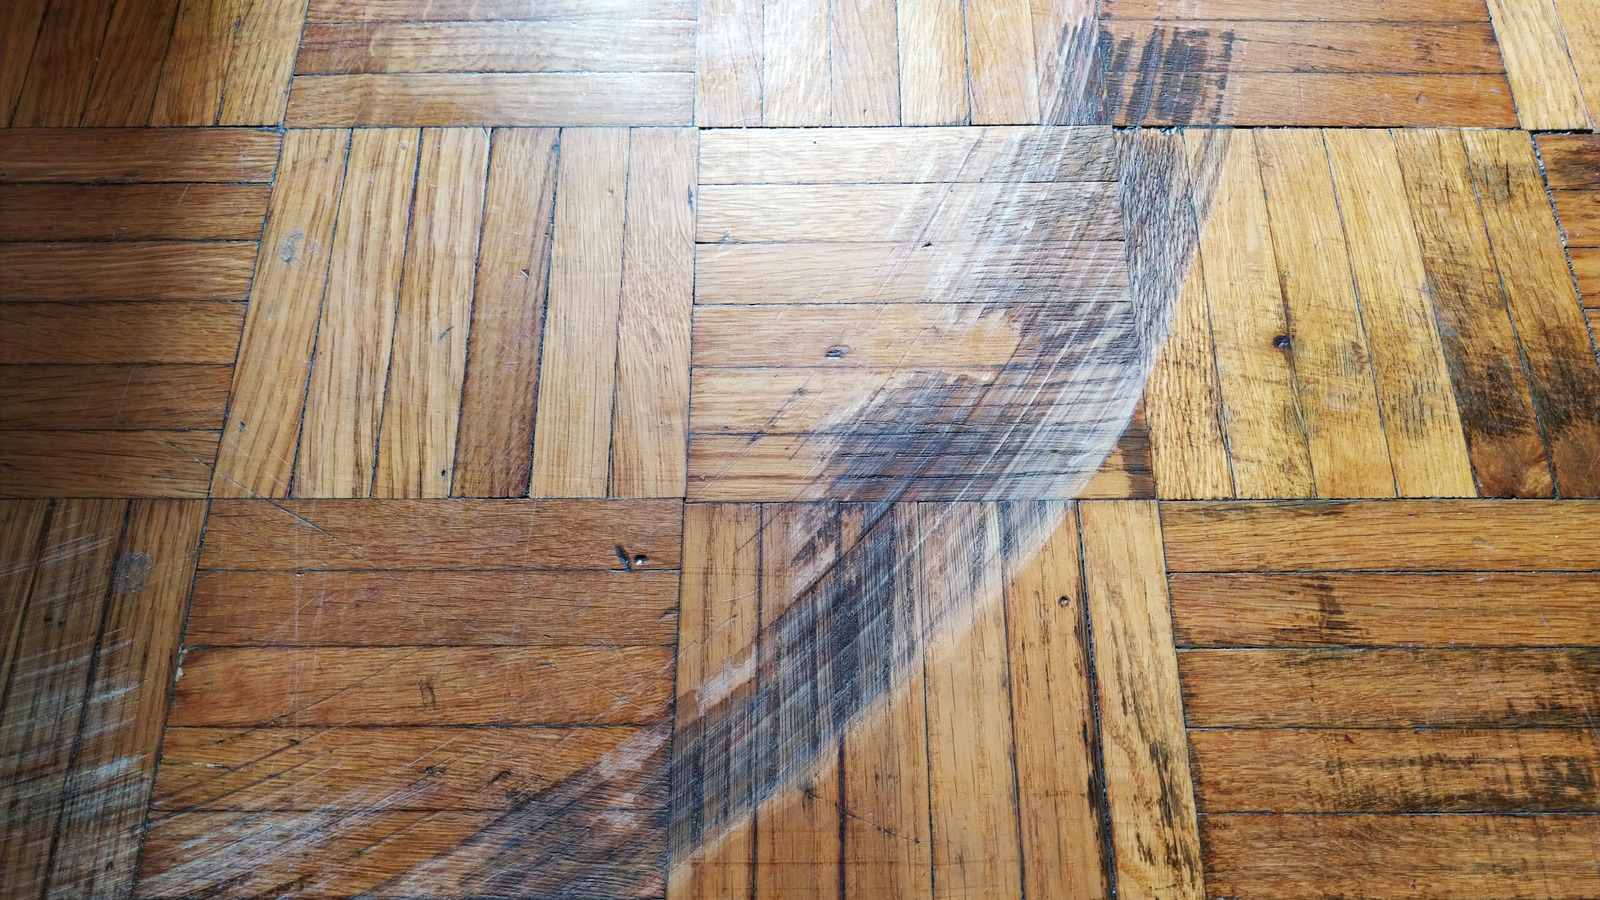 Fix The Huge Scratch In Your Wood Floor, How To Get Rid Of Scuff Marks On Engineered Hardwood Floors